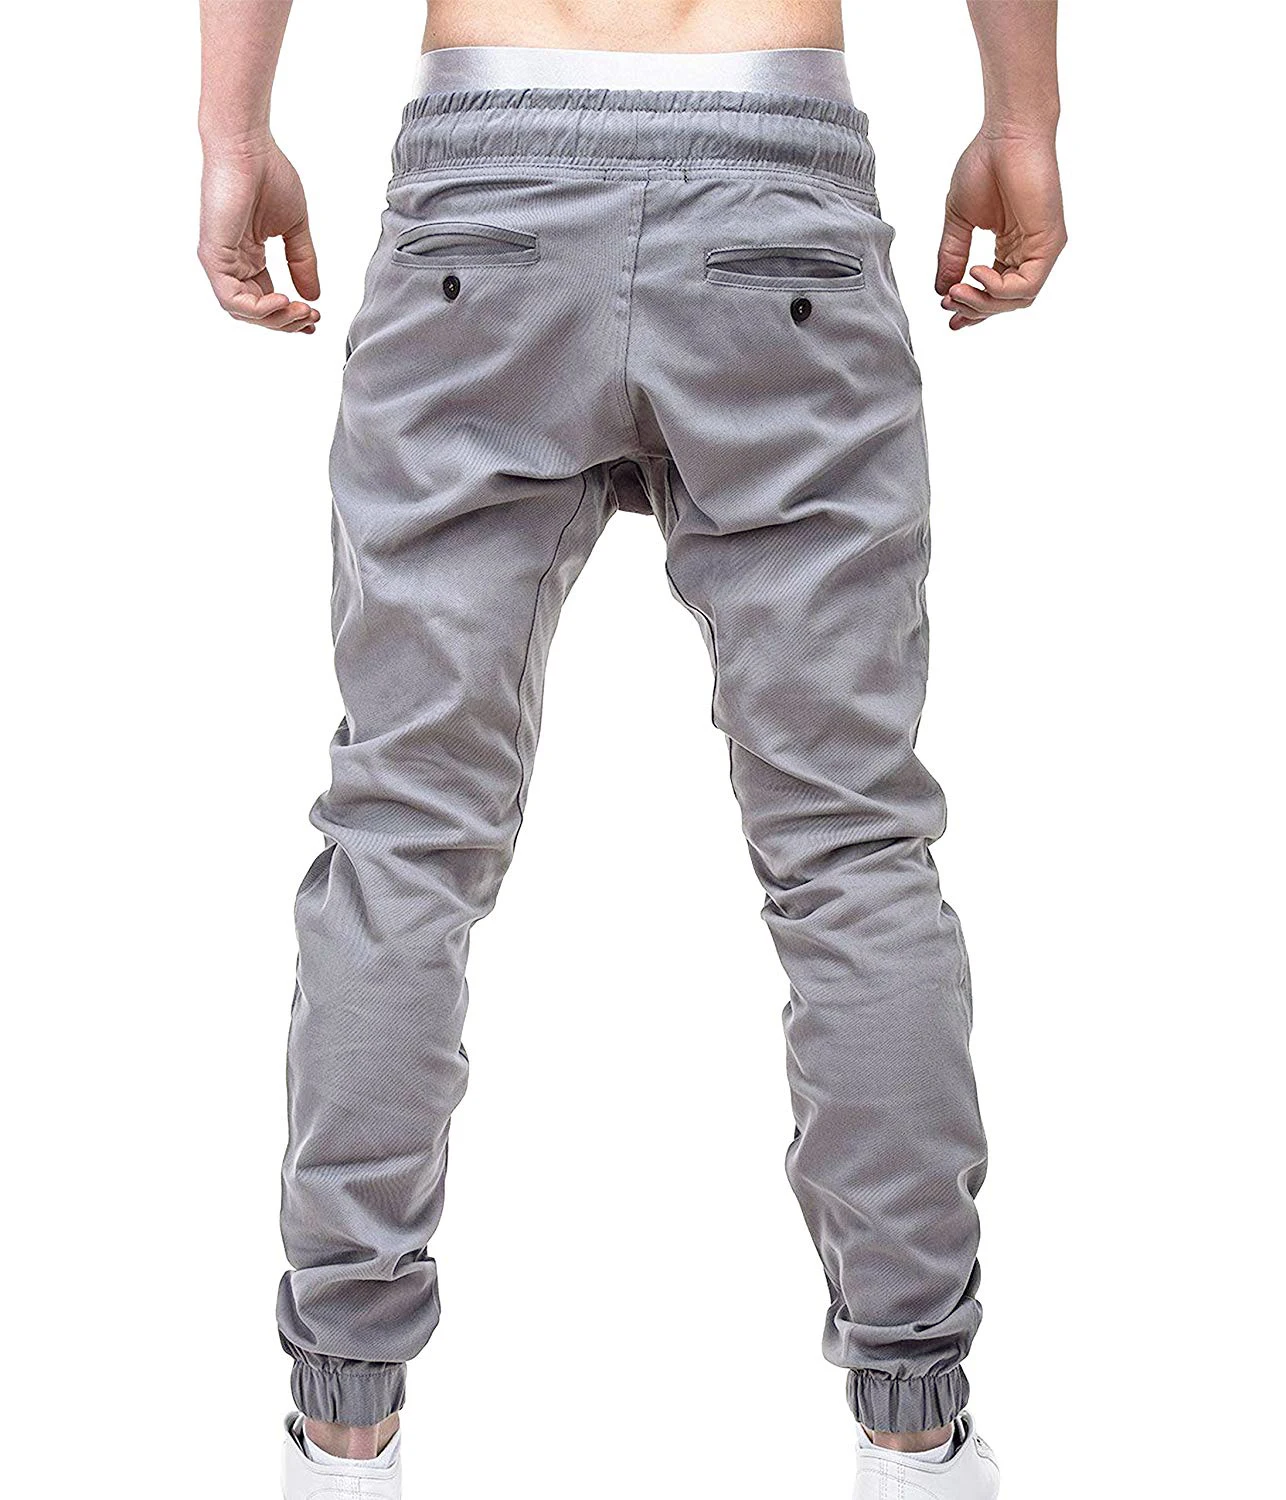 

High quality Foreign trade large size solid color tether casual trousers men clothing 2018 streetwear pants men XXXL 4XL 5XL 6XL